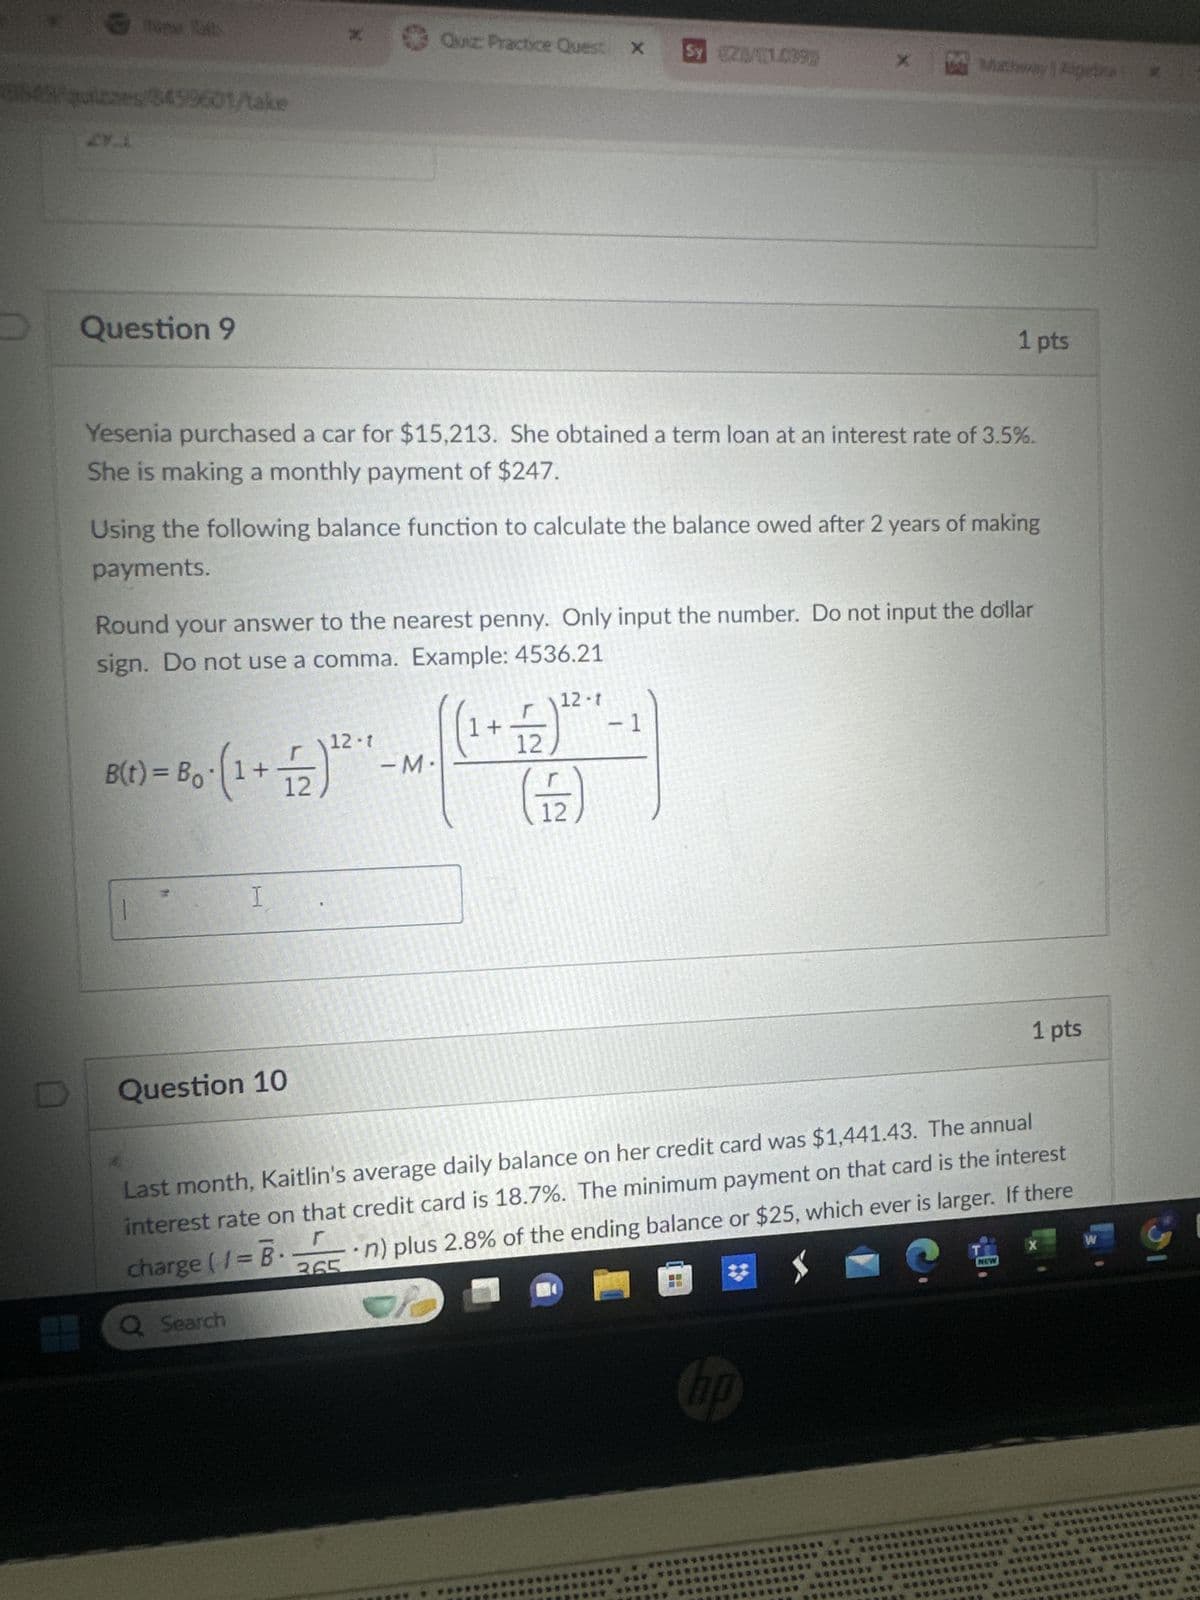 064/quizzes/8499601/take
D
Question 9
D
x
Quiz: Practice Quest X
Sy 02/01.0999
× Mathway | Algete
1 pts
Yesenia purchased a car for $15,213. She obtained a term loan at an interest rate of 3.5%.
She is making a monthly payment of $247.
Using the following balance function to calculate the balance owed after 2 years of making
payments.
Round your answer to the nearest penny. Only input the number. Do not input the dollar
sign. Do not use a comma. Example: 4536.21
12-1
21 (21 + 1). 0g = (1)8
-M.
(1+
12
12-1
(뚜)
-1
I
Question 10
1 pts
Last month, Kaitlin's average daily balance on her credit card was $1,441.43. The annual
interest rate on that credit card is 18.7%. The minimum payment on that card is the interest
⚫n) plus 2.8% of the ending balance or $25, which ever is larger. If there
charge (1 = B.
365
Q Search
hp
X
W
NEW
****** *** *******
5
***** ********* ************
***** **** **